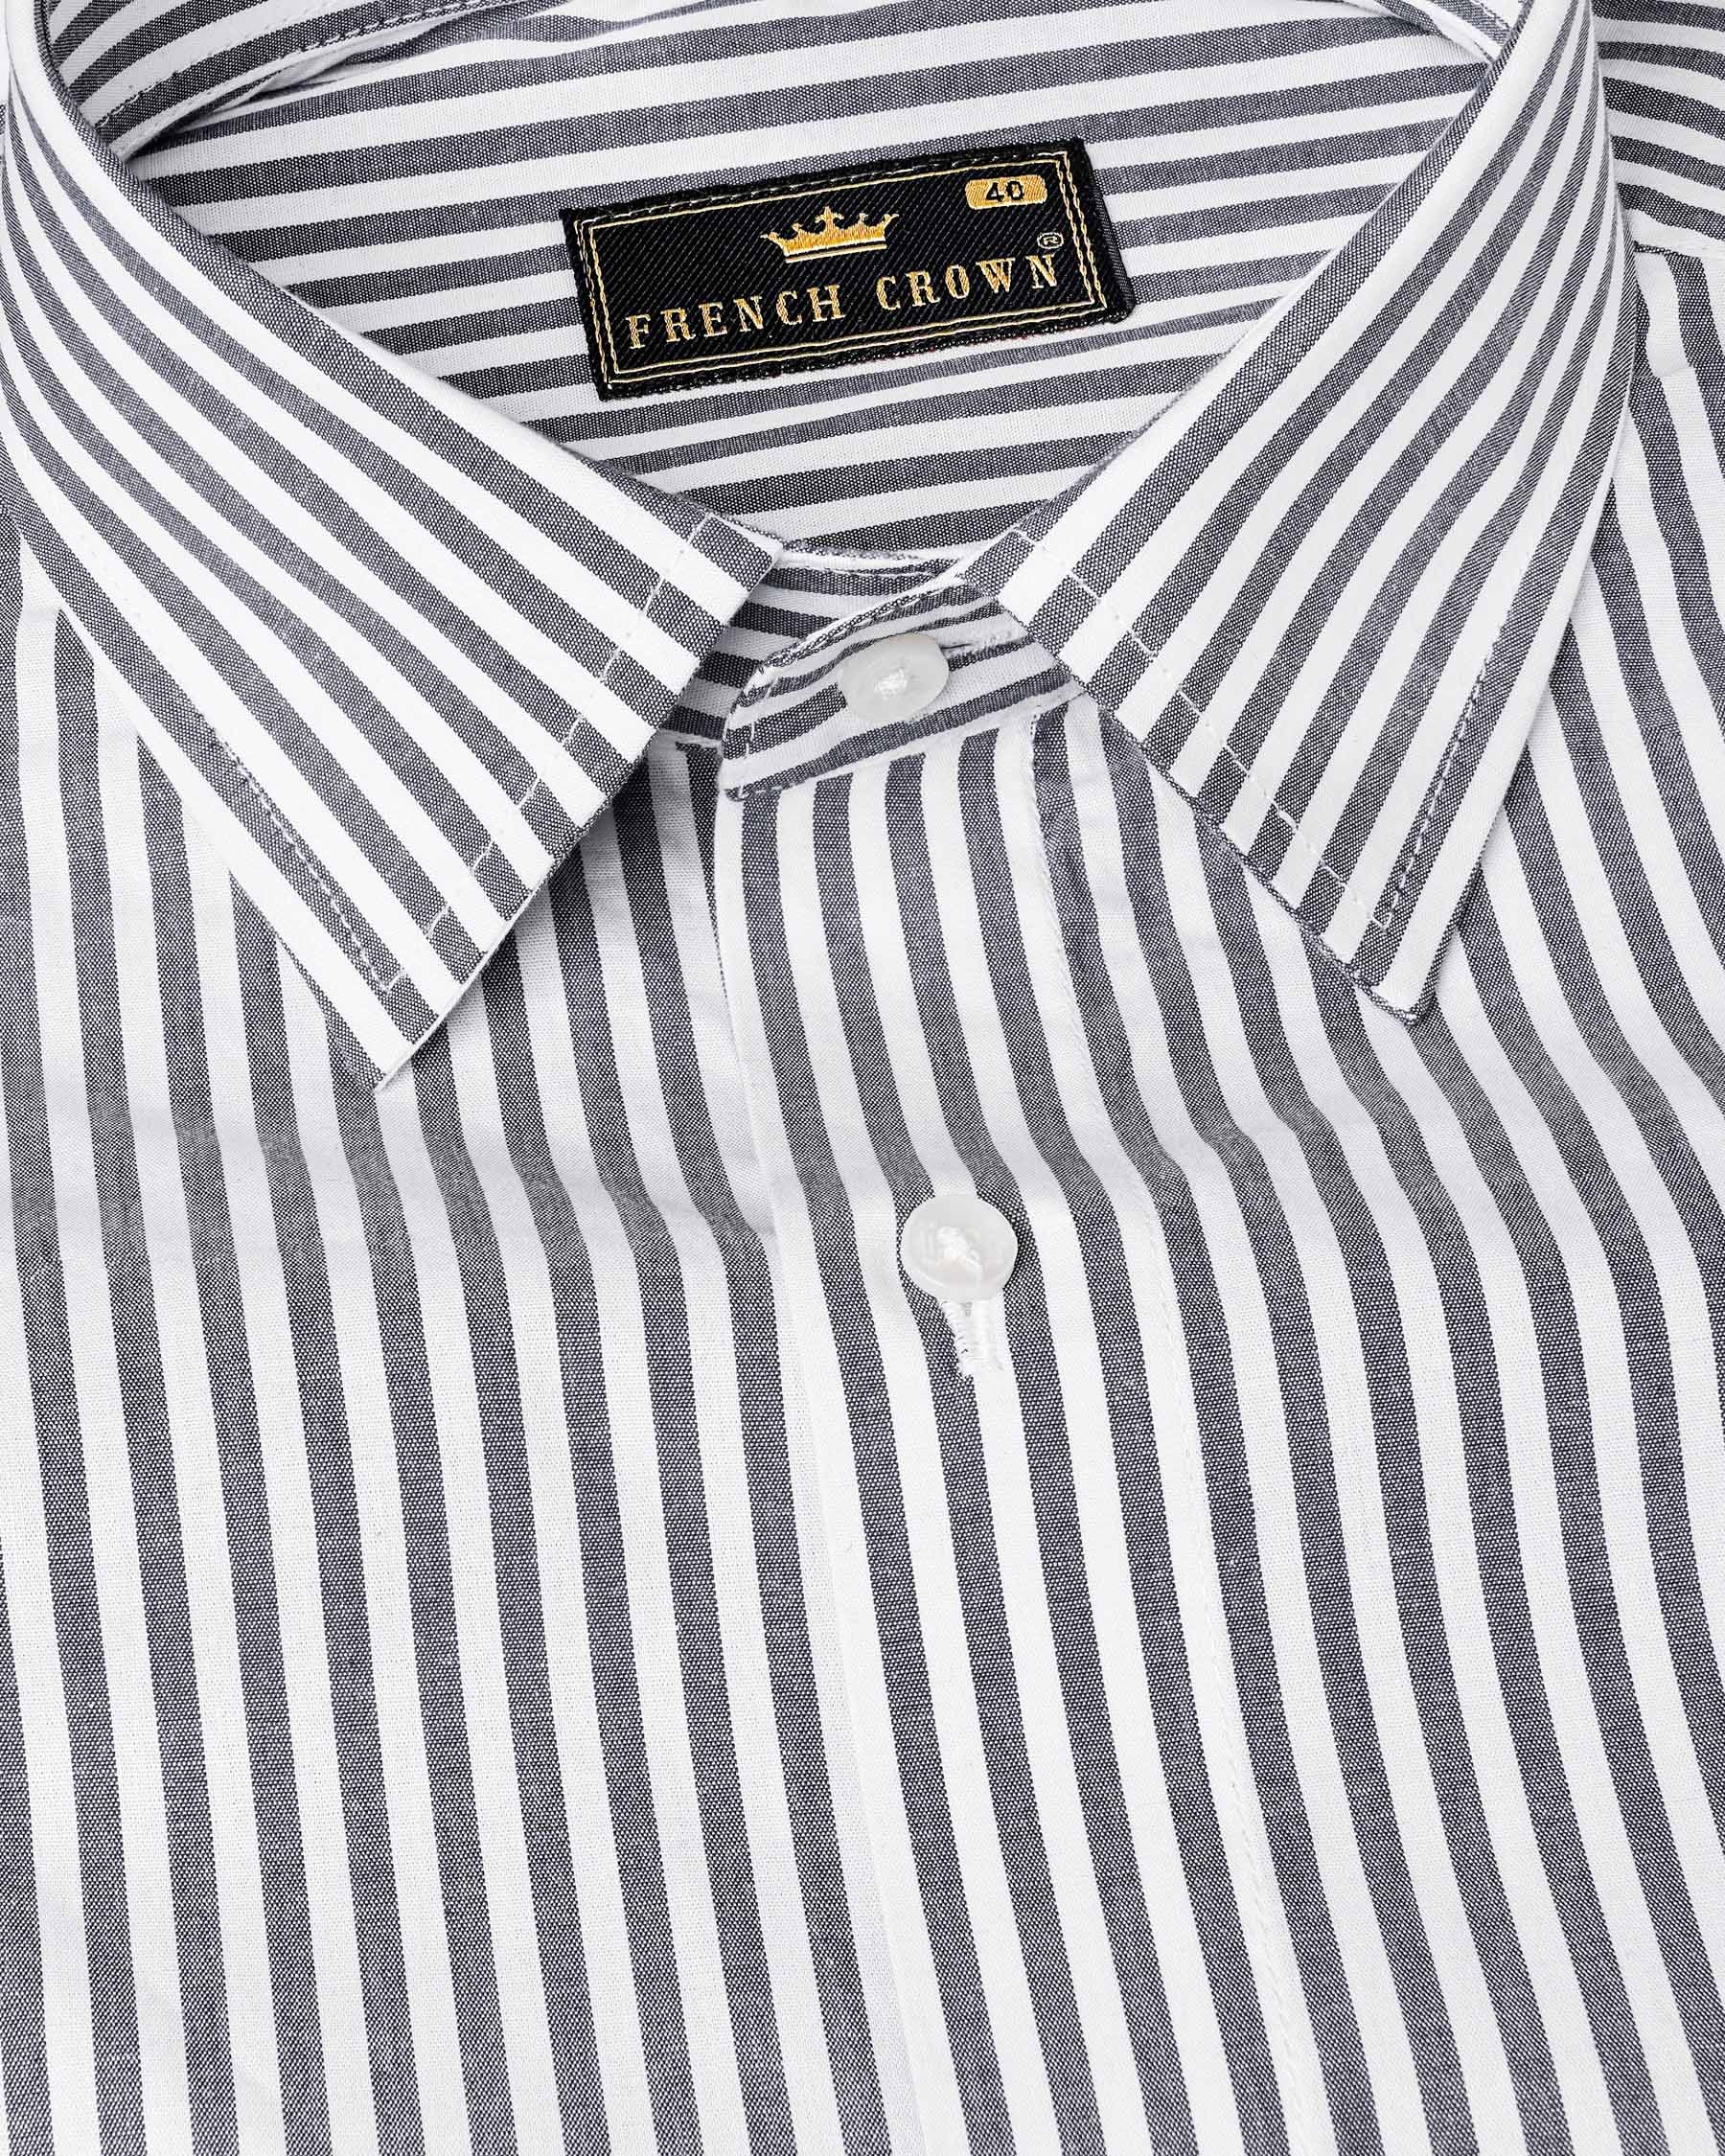 Dolphin Gray and White Striped Premium Cotton Shirt 7966-38,7966-H-38,7966-39,7966-H-39,7966-40,7966-H-40,7966-42,7966-H-42,7966-44,7966-H-44,7966-46,7966-H-46,7966-48,7966-H-48,7966-50,7966-H-50,7966-52,7966-H-52